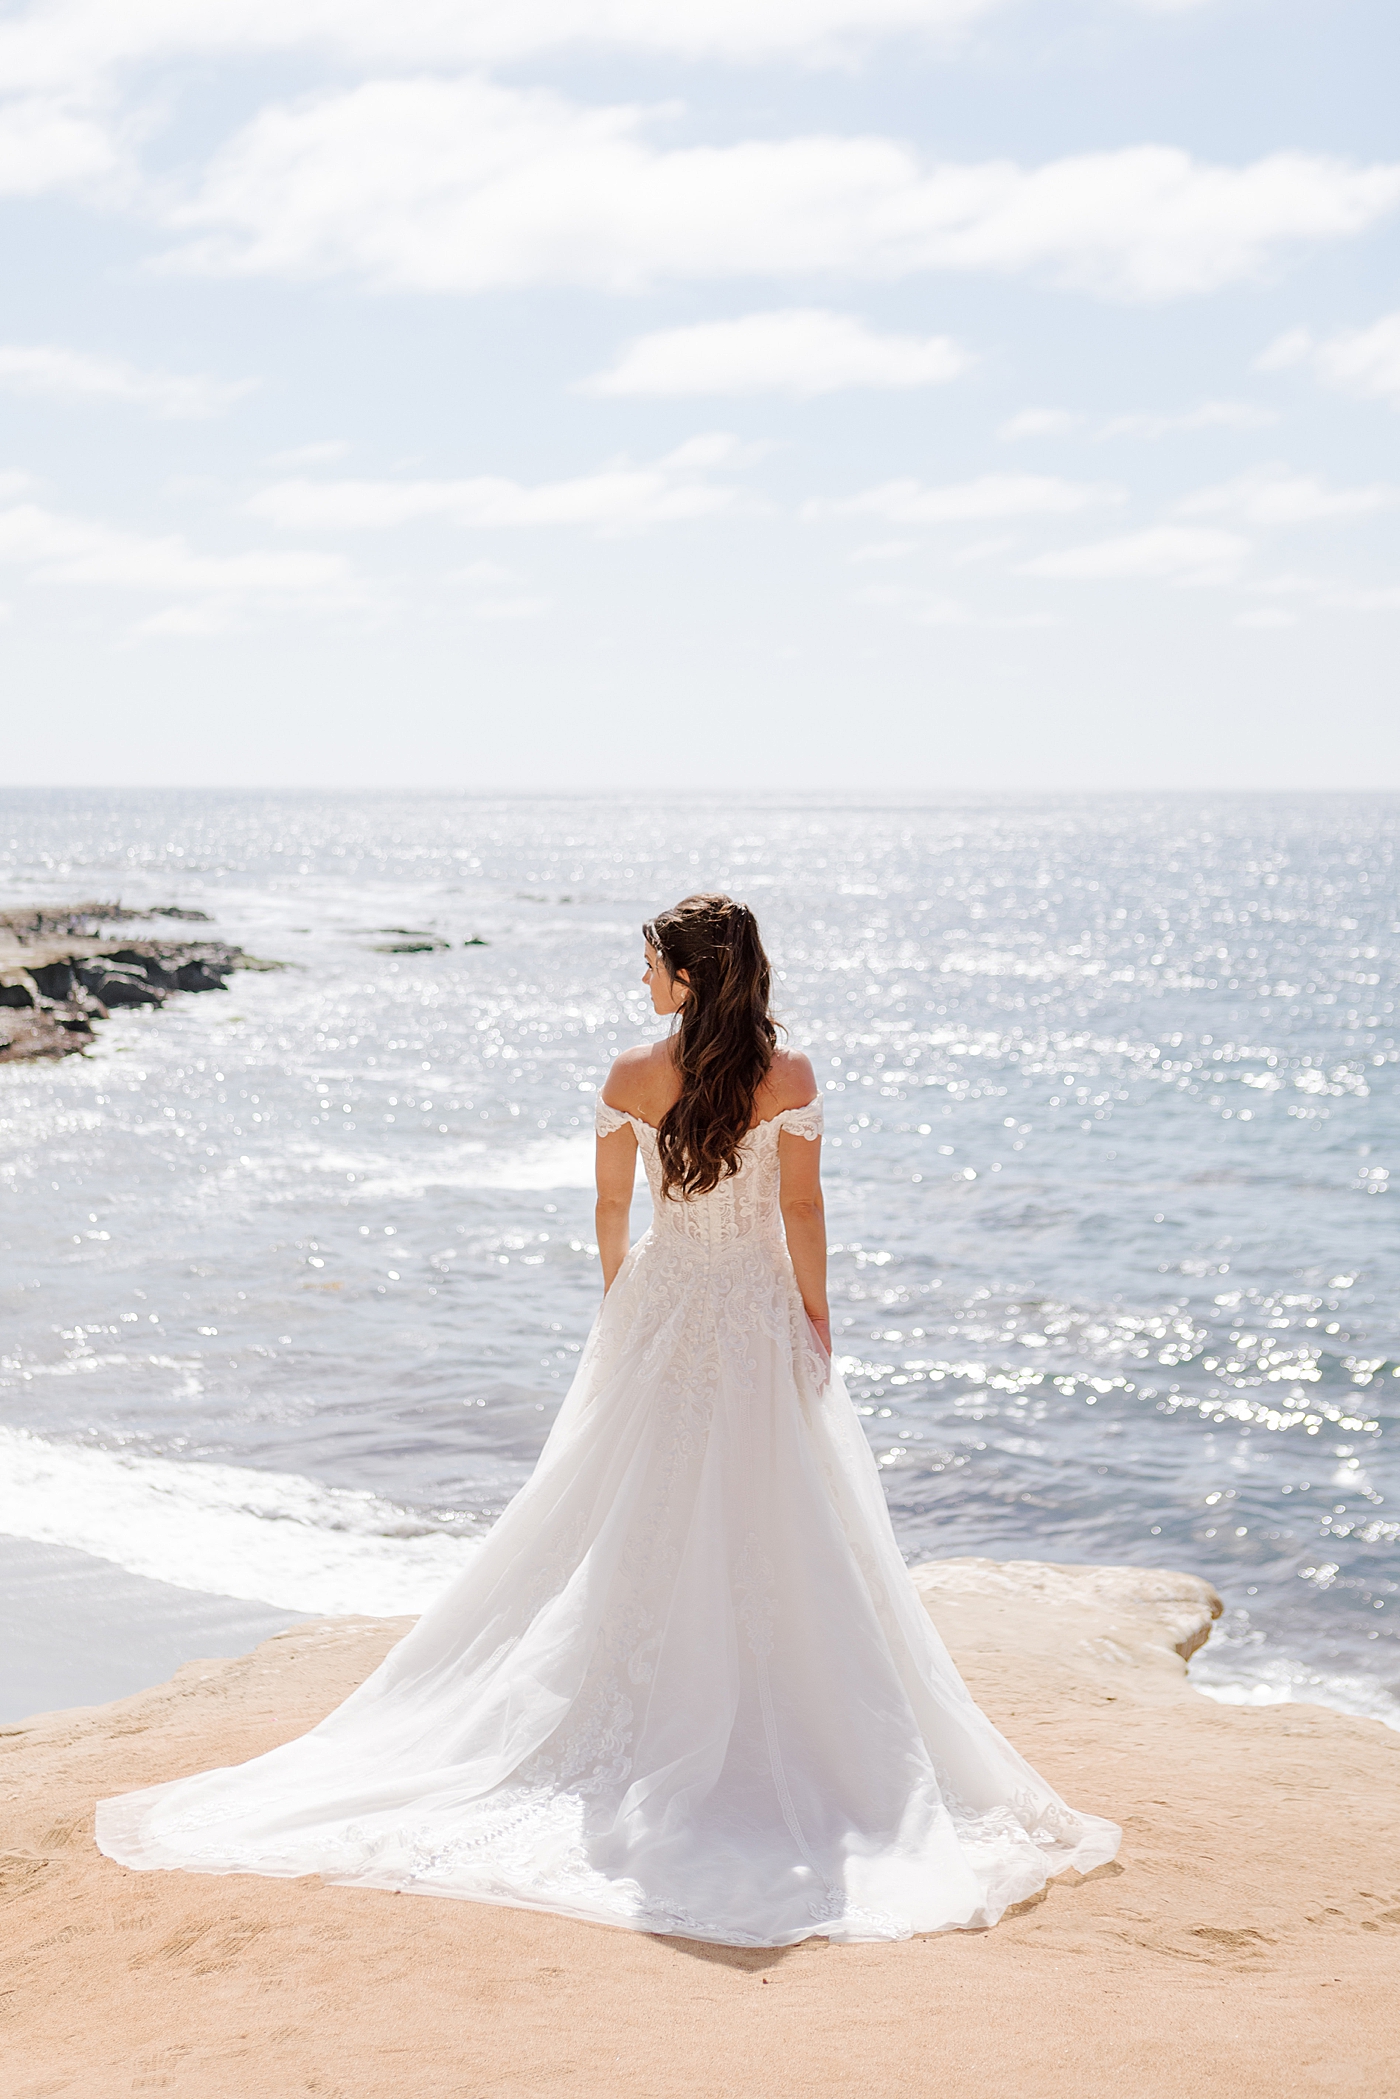 Bride standing oceanfront in backlit, full length photo displaying wedding dress | Image by Hope Helmuth Photography